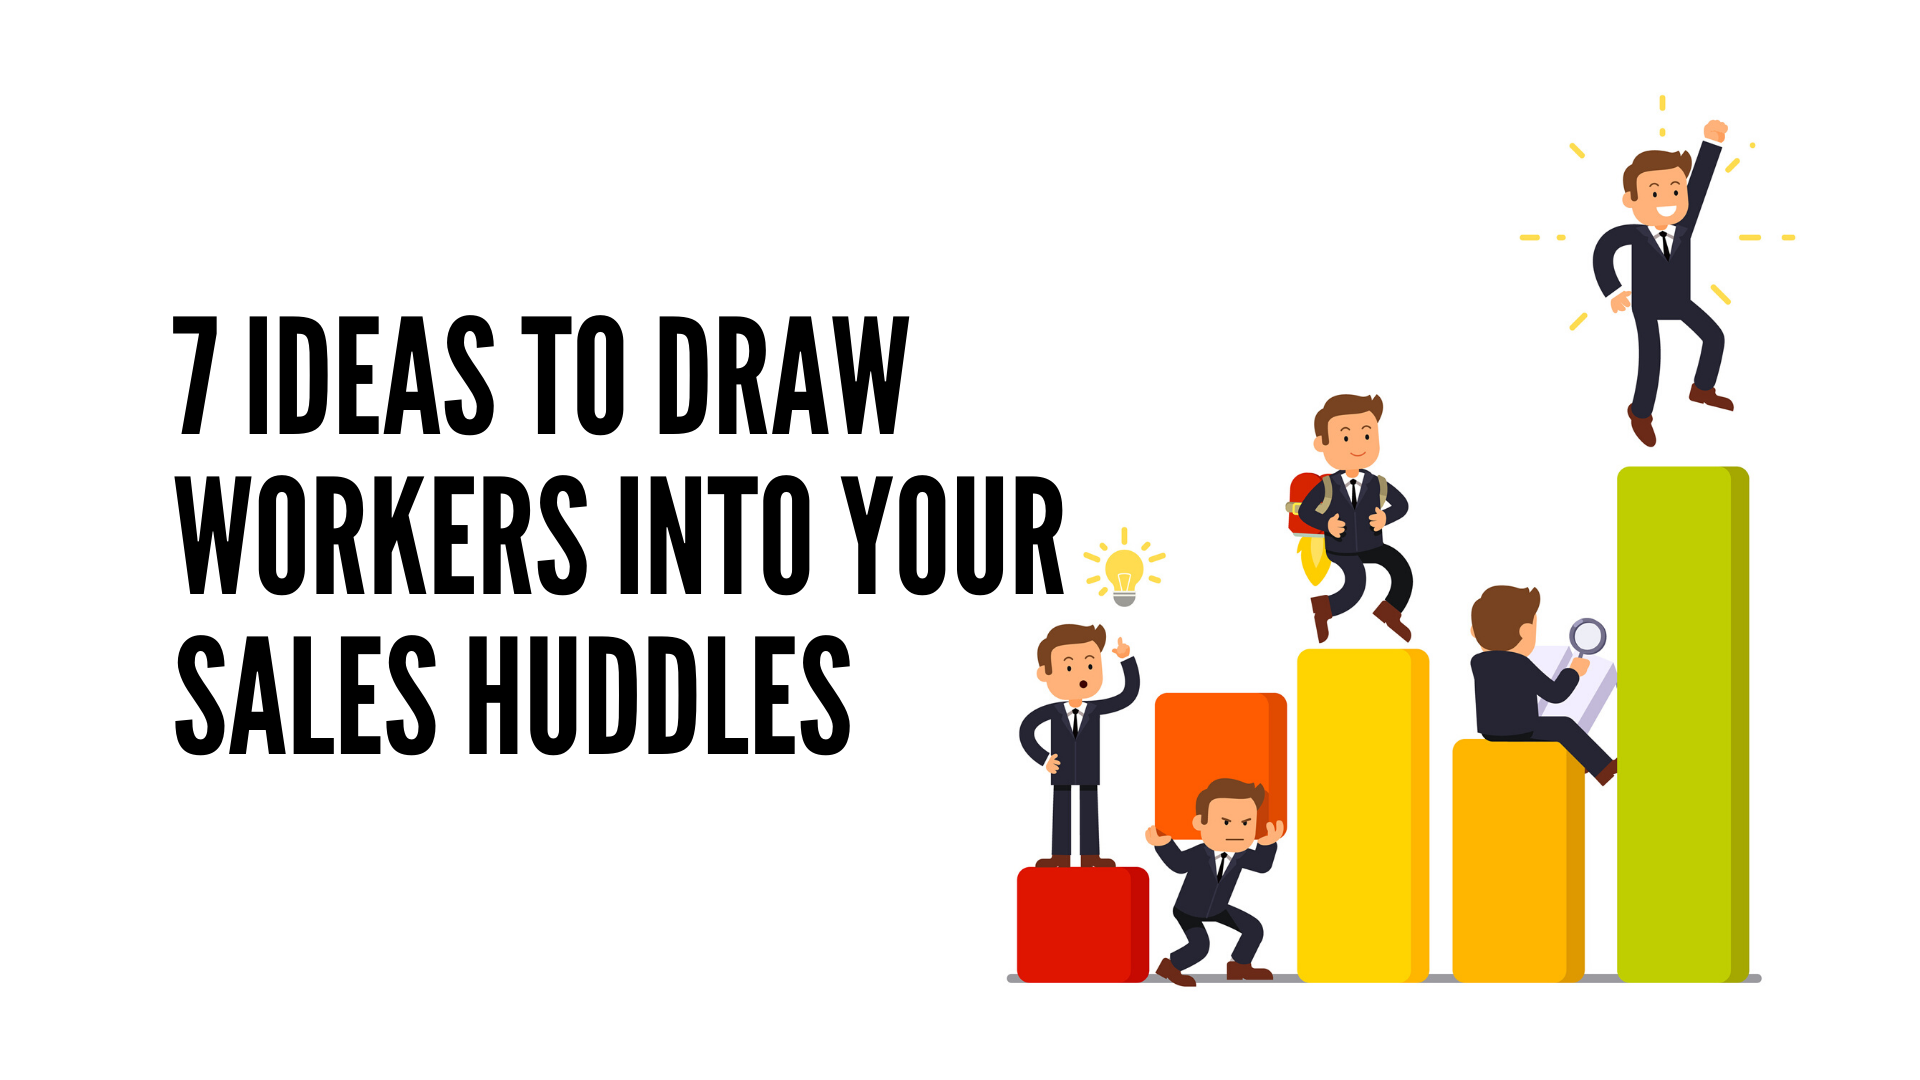 7 Ideas to Draw Workers Into Your Sales Huddles